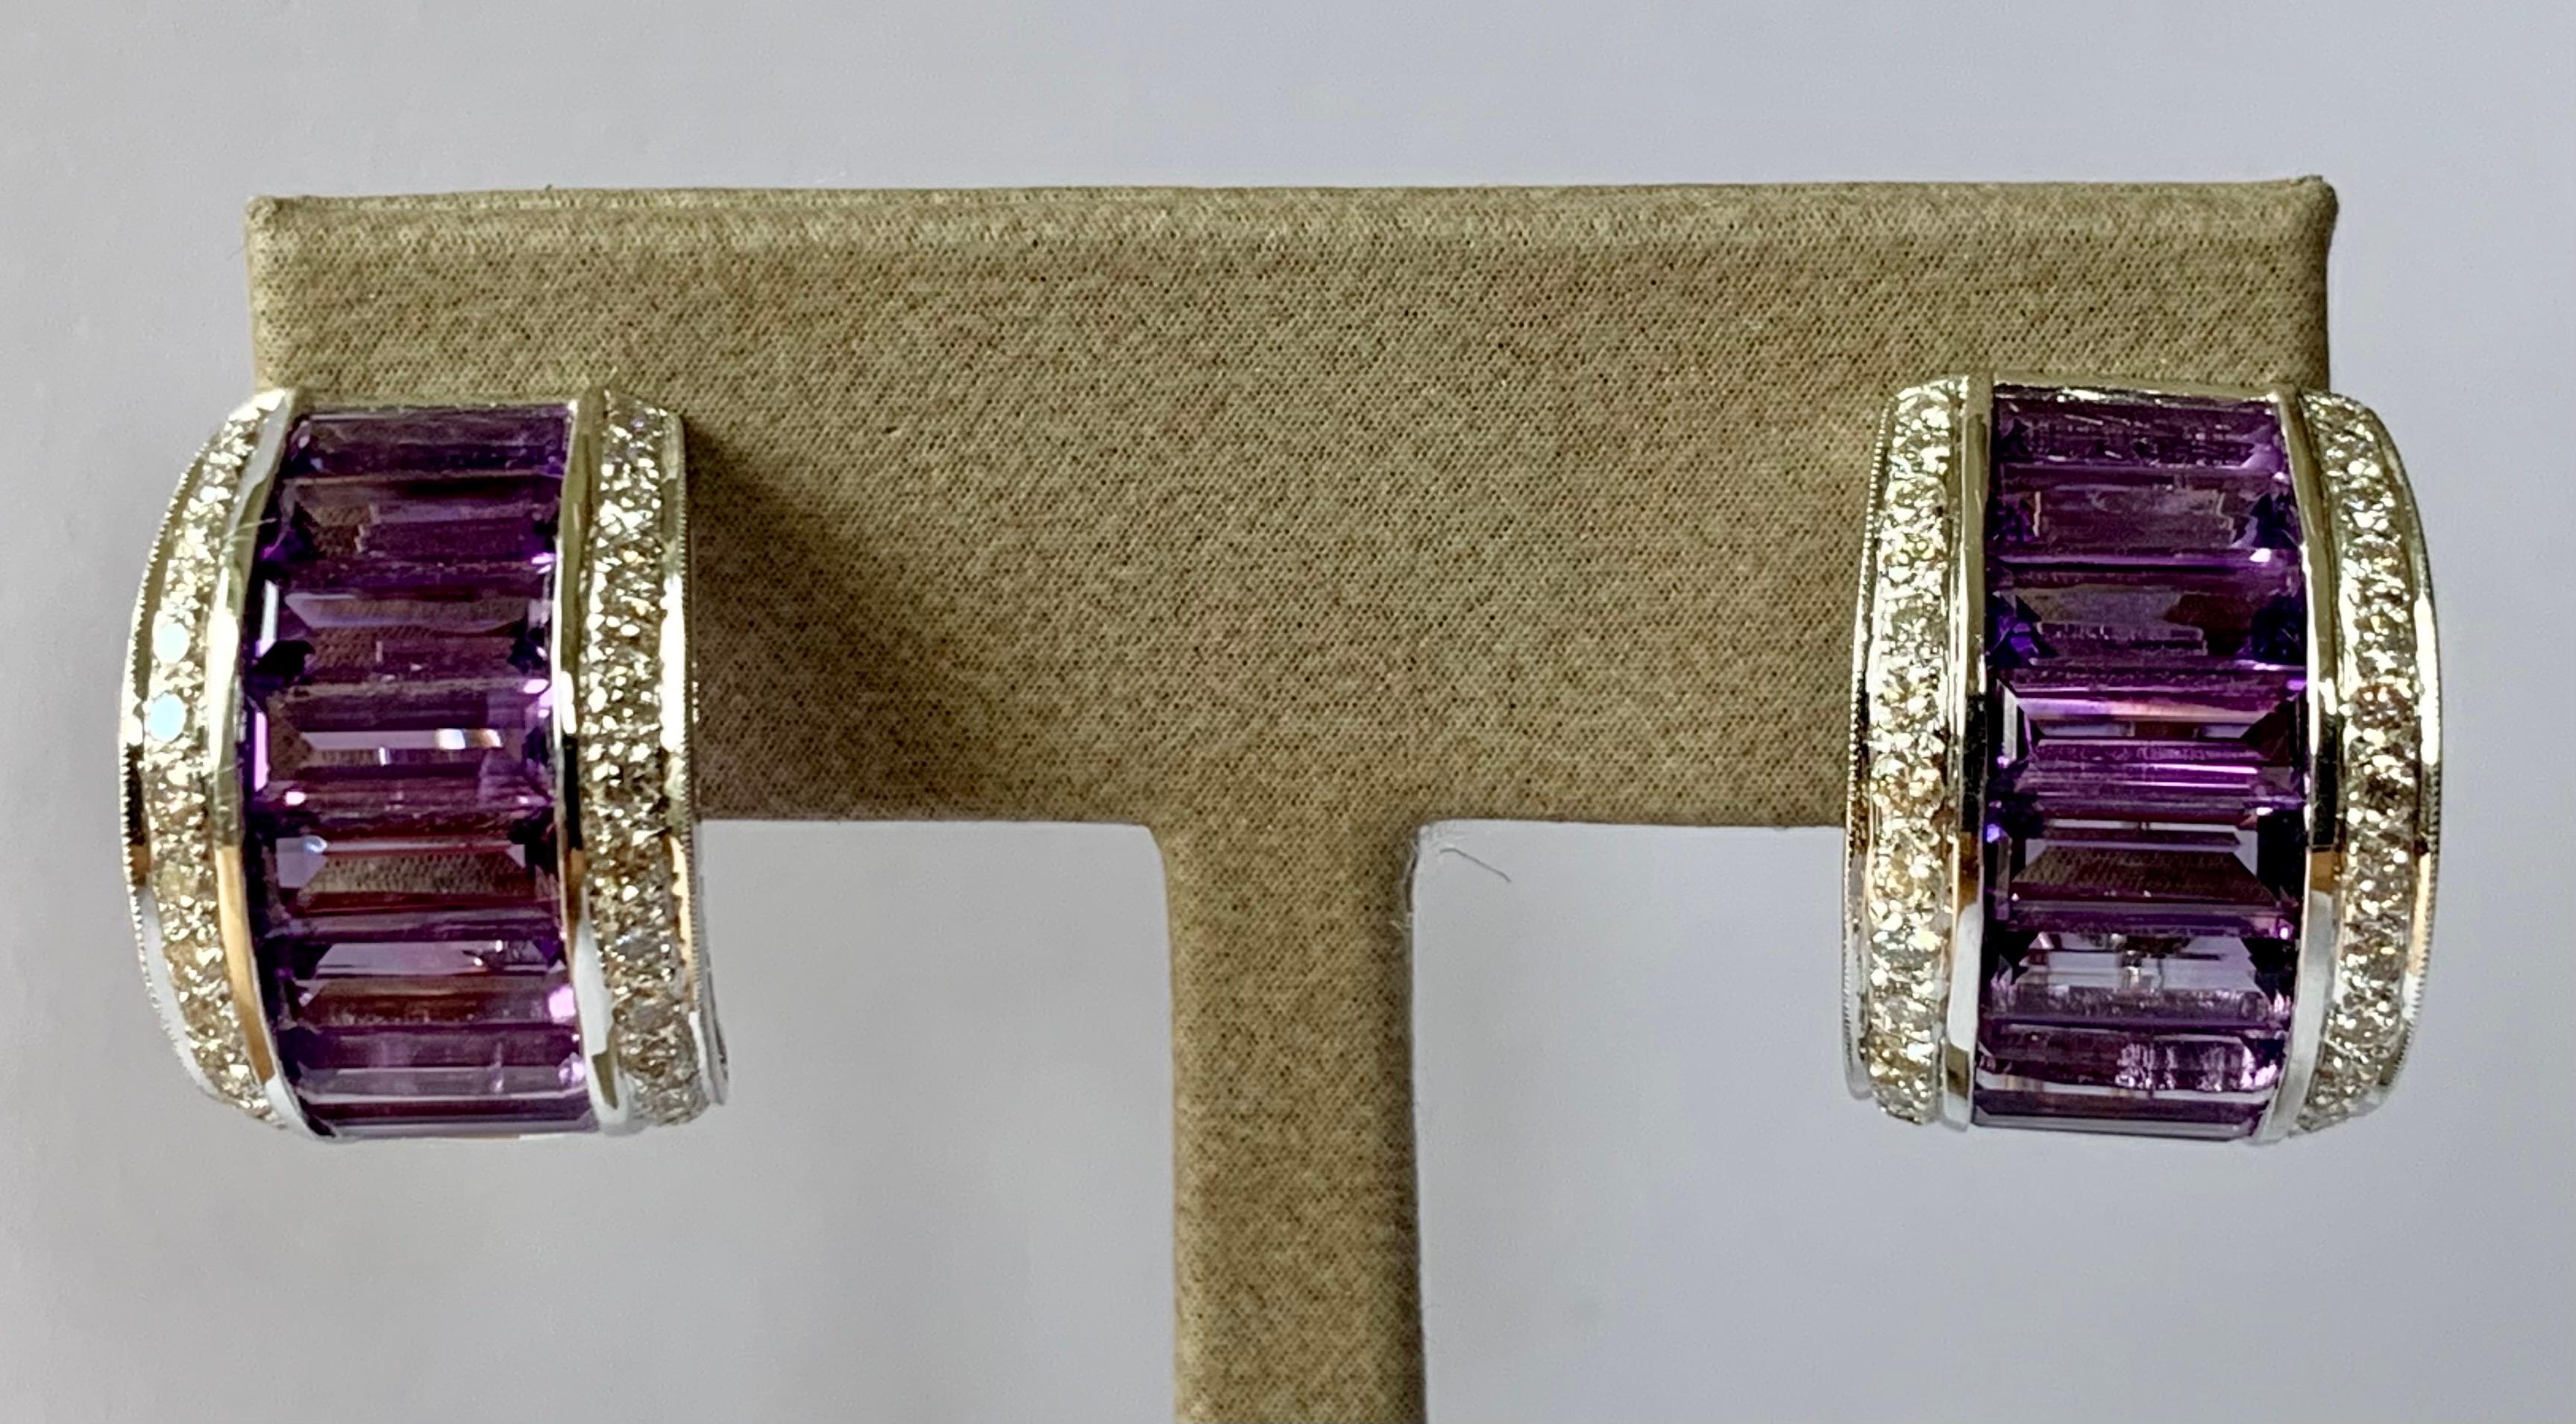 A pair of Diamond and Amethyst half hoop earrings, with 60 pavé set round brilliant-cut Diamonds weighing 1.08 ct  and 18 channel set baguette-cut Amethysts with a total weight of 7.67 ct.  Mounted in 18 K white Gold.
Omega clip post earrings. 